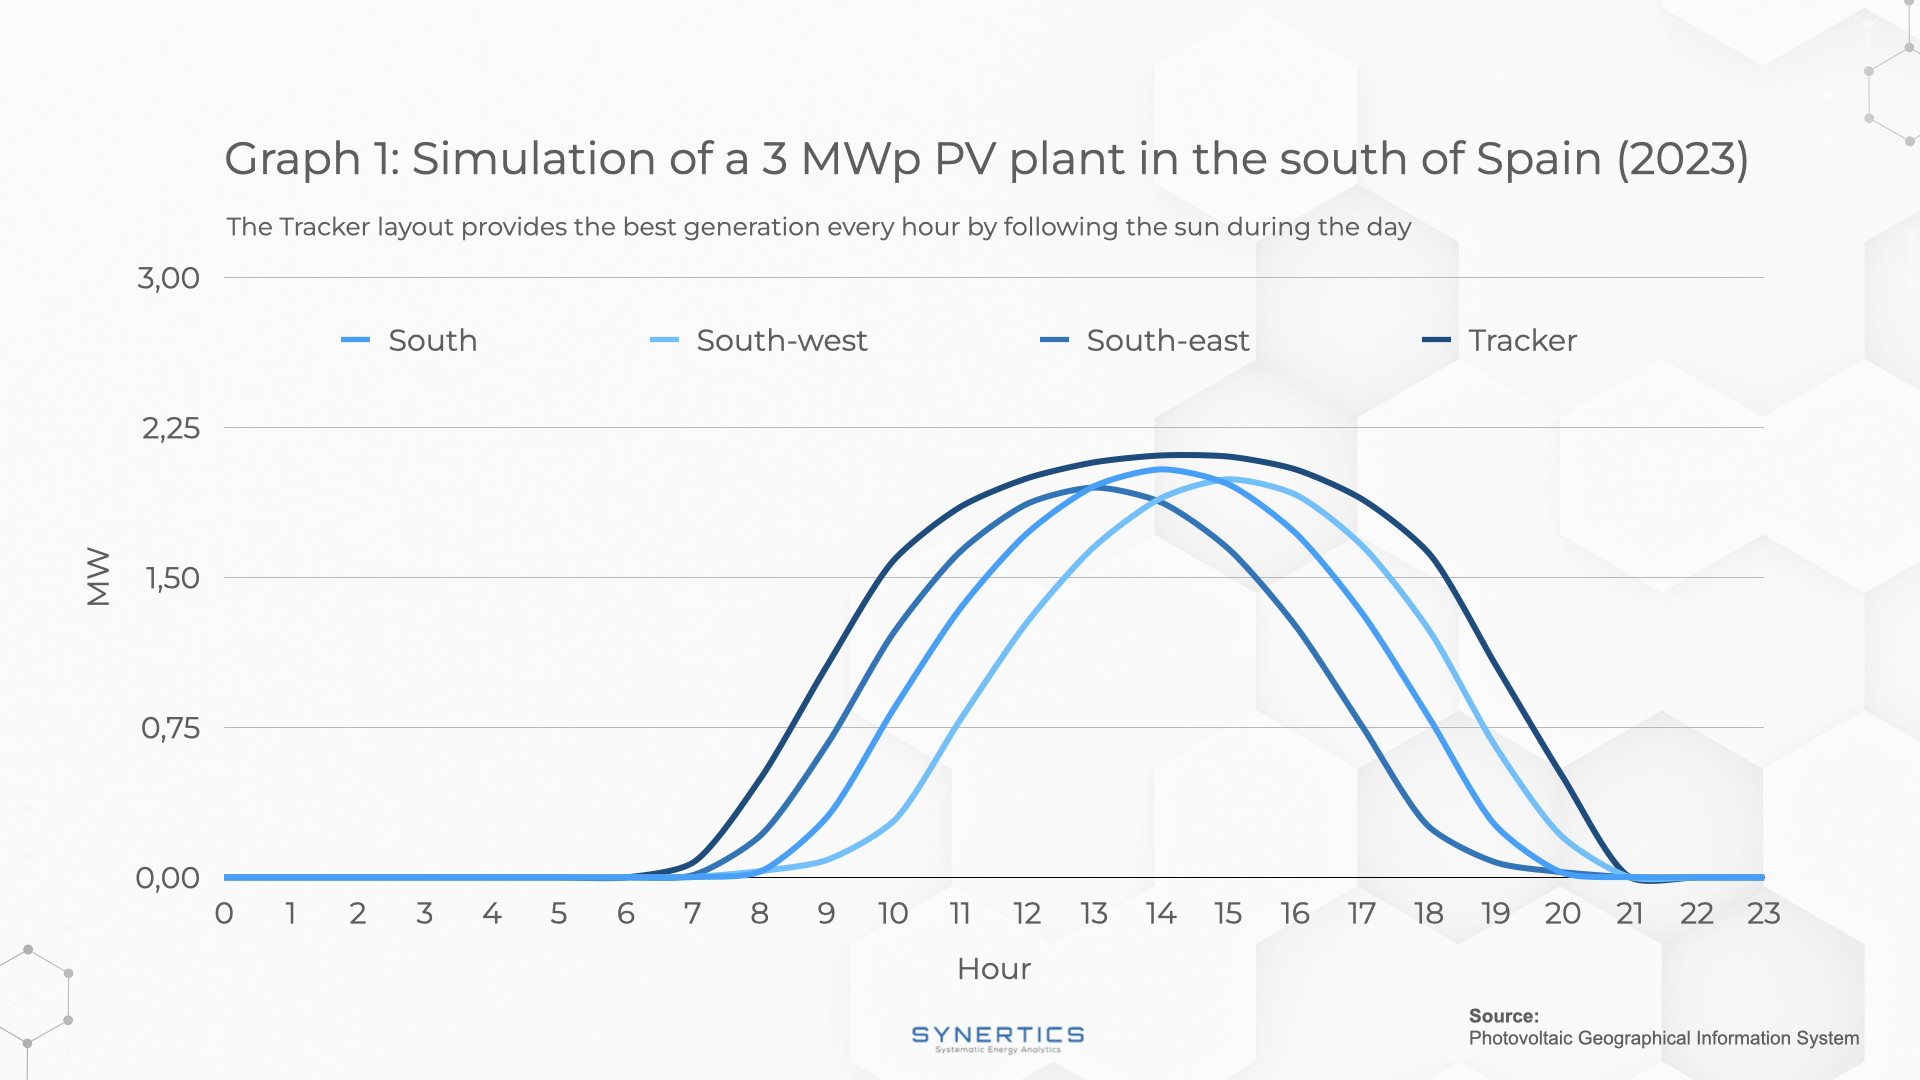 Solar production profile in the south of Spain